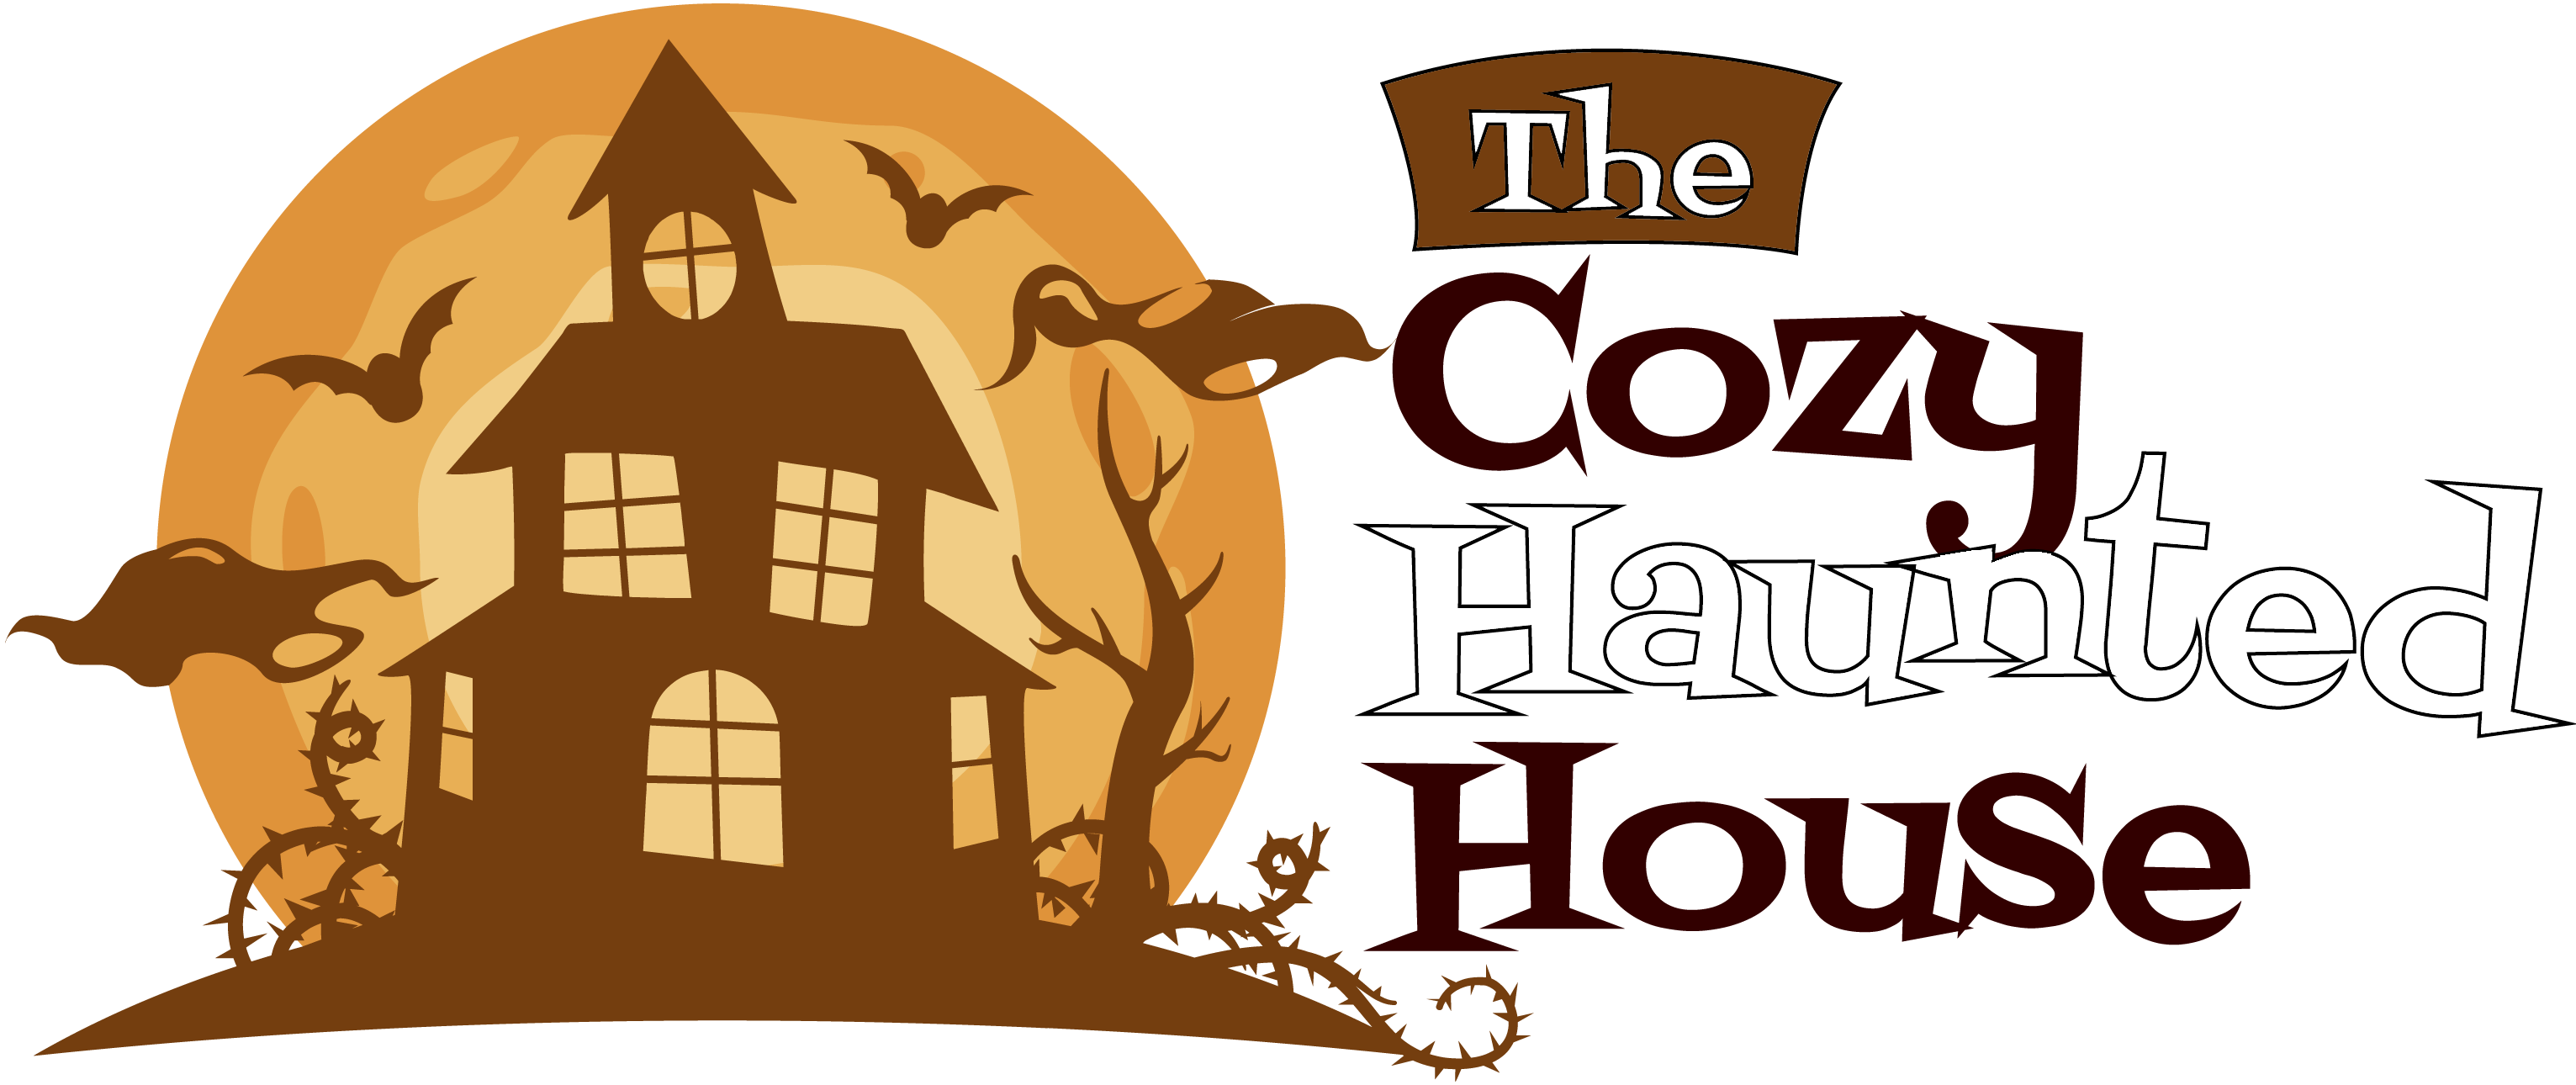 The Cozy Haunted House